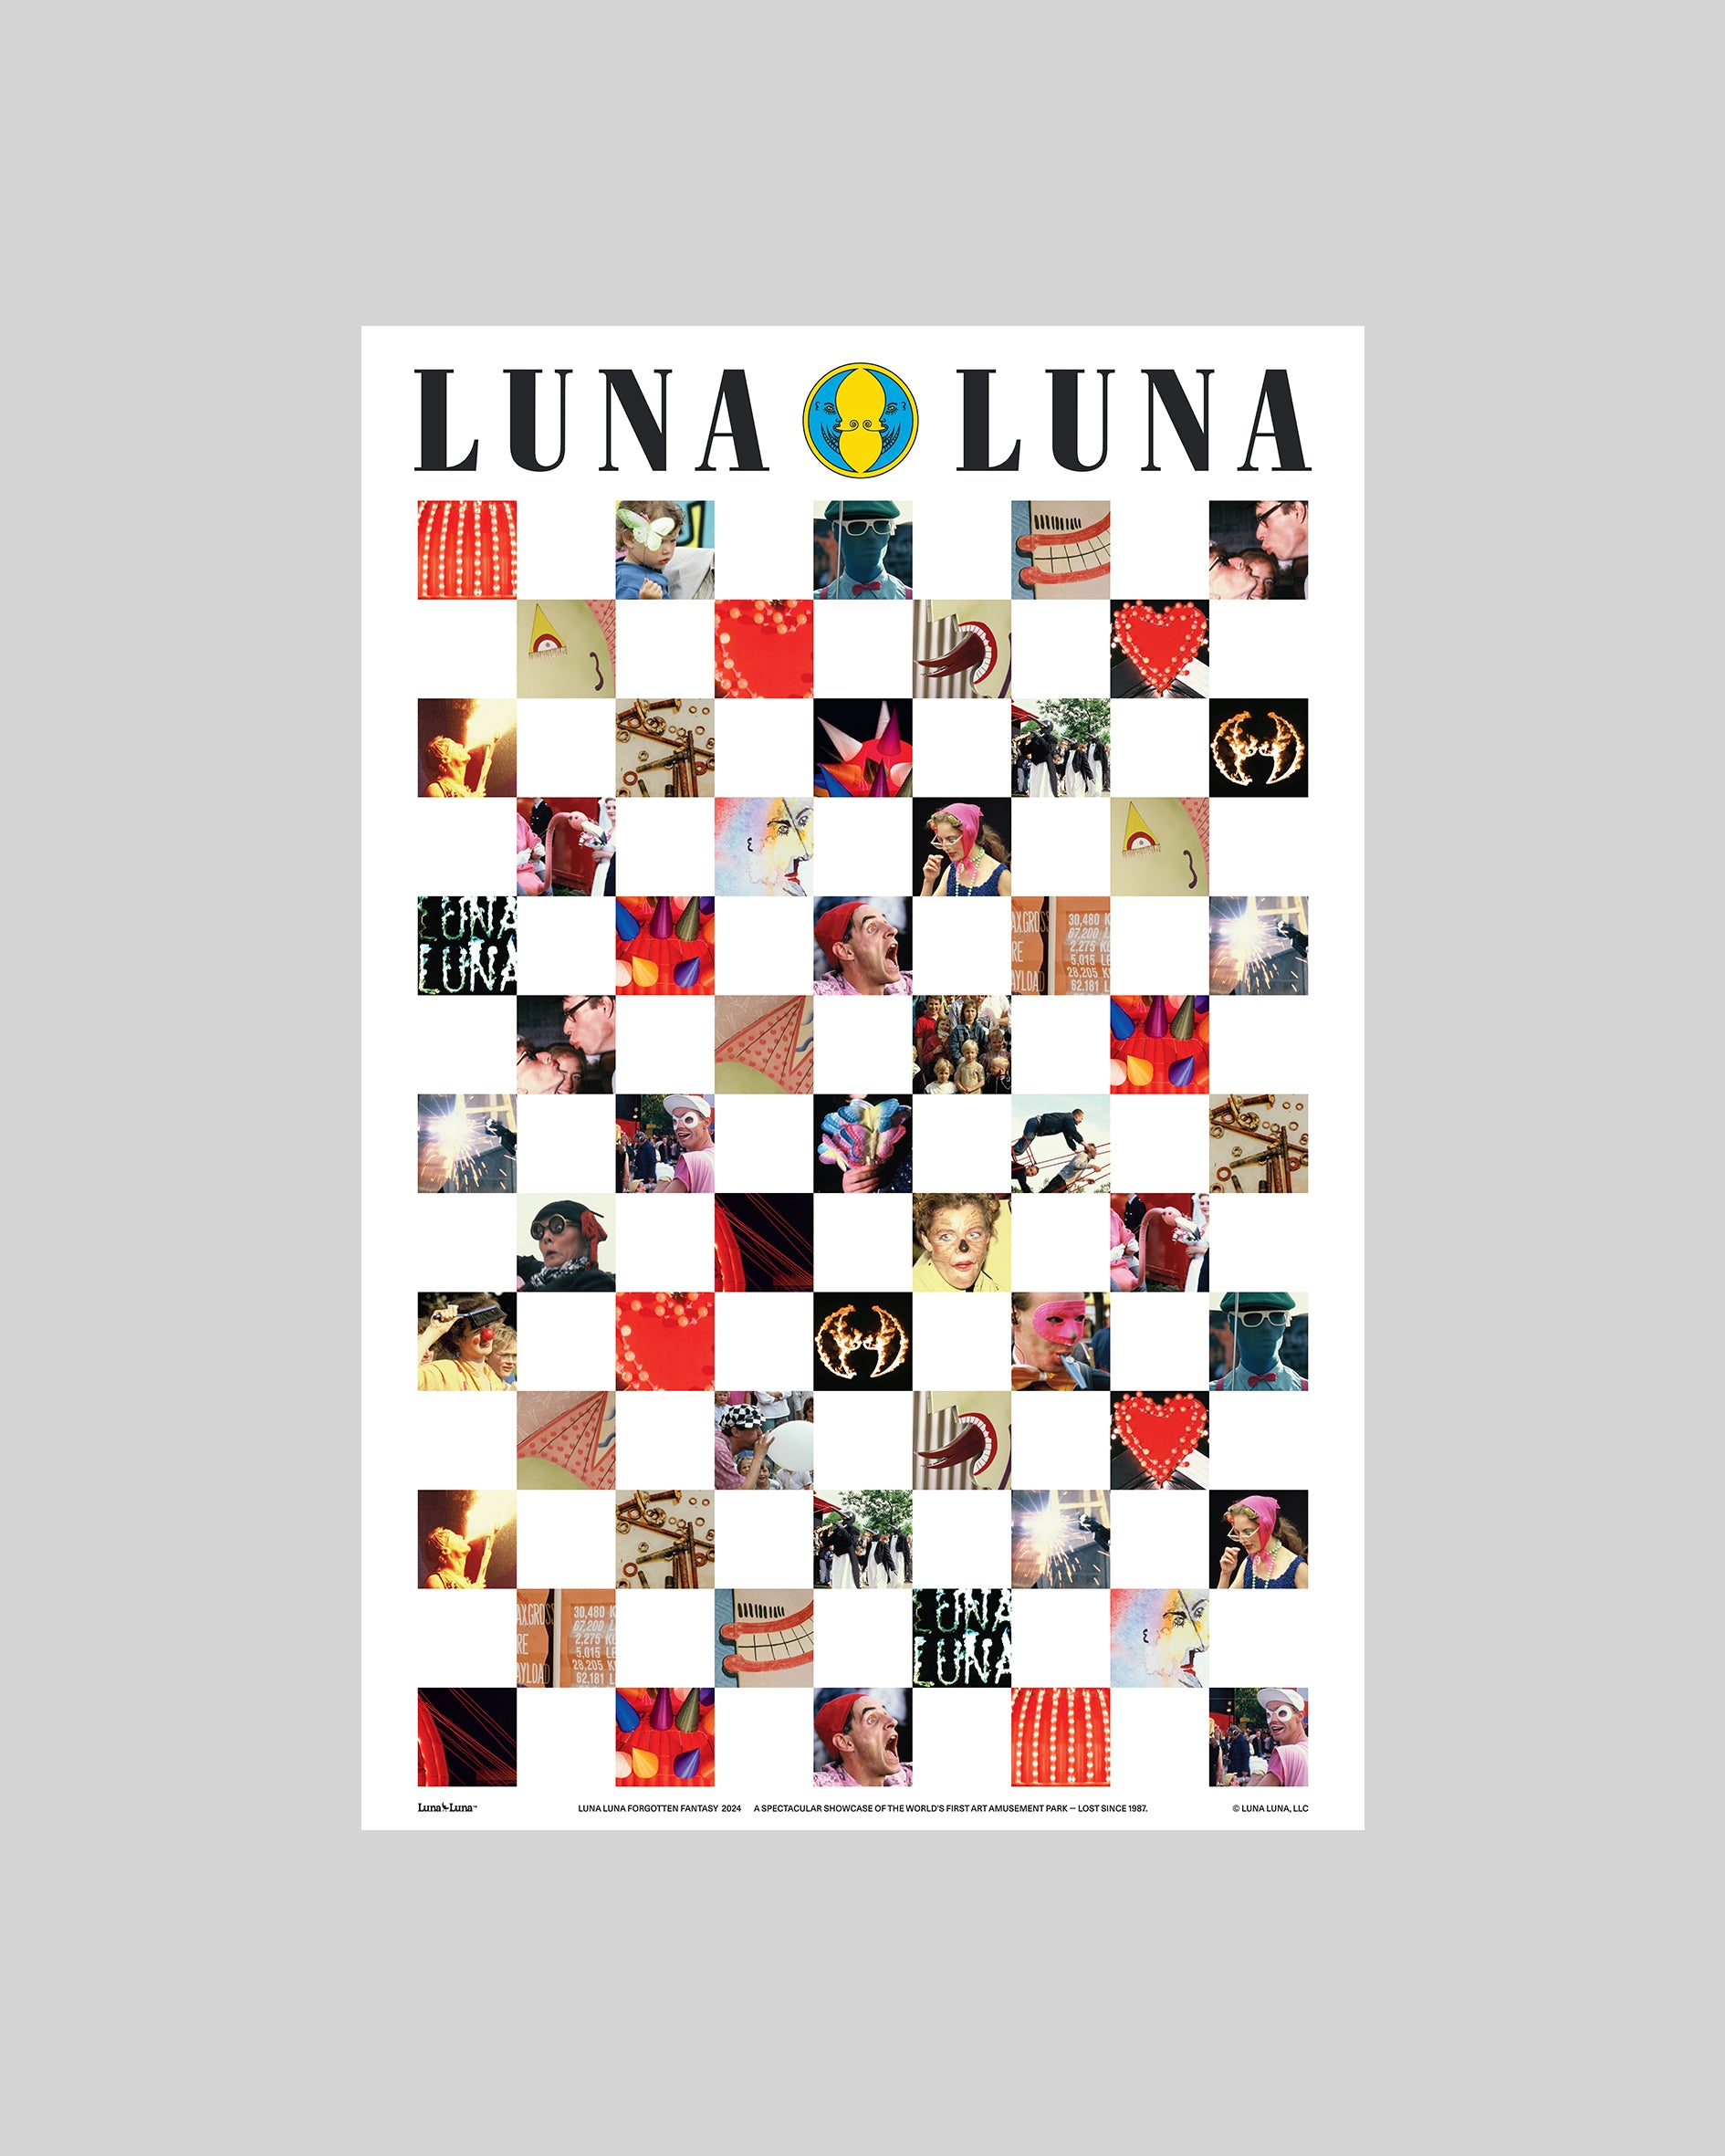 1987 Faces Poster. Square archive photographs laid in a checkered pattern on a white poster with the Luna Luna logo at the top. 24 inches wide by 36 inches tall.